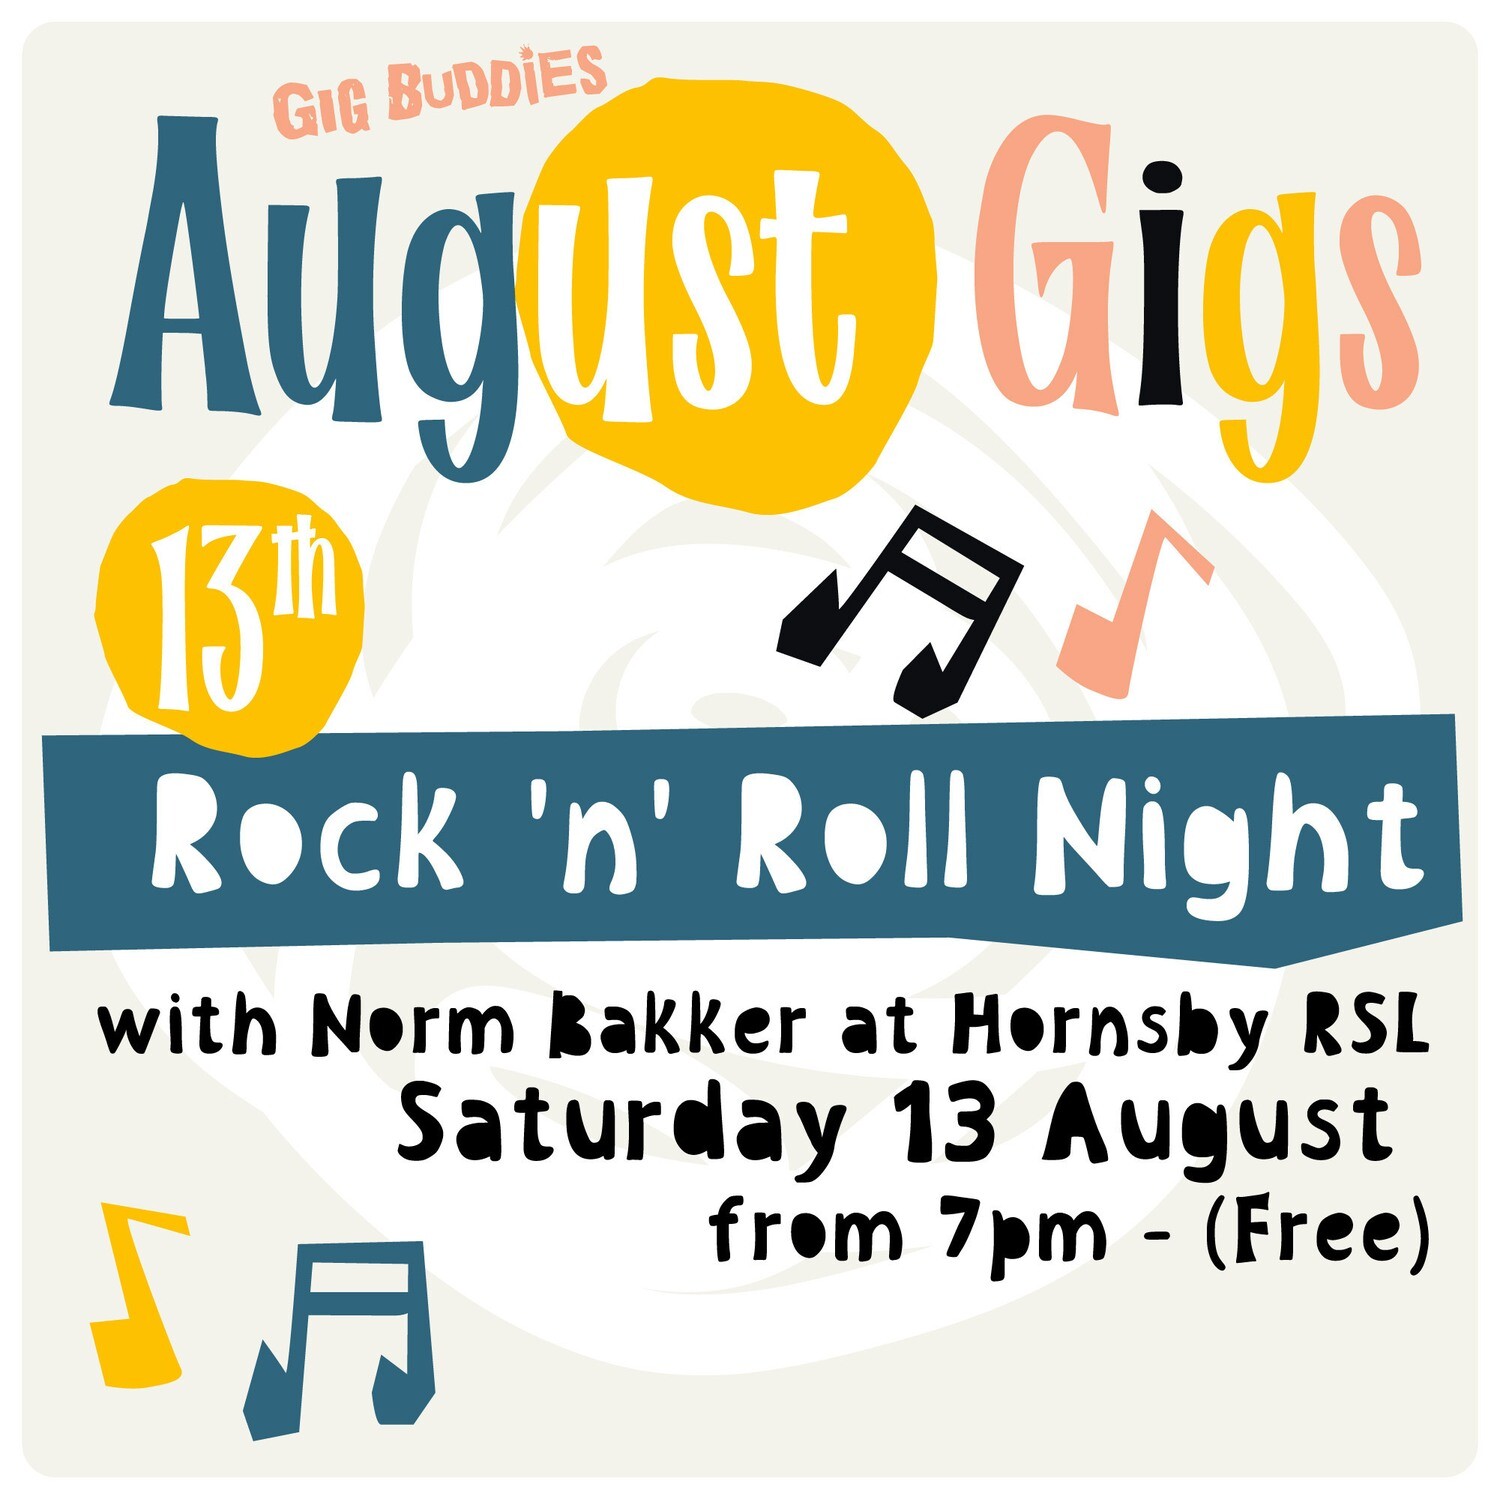 A night of classic rock ’n roll courtesy of Norm Bakker @ Hornsby RSL - Saturday 13 August